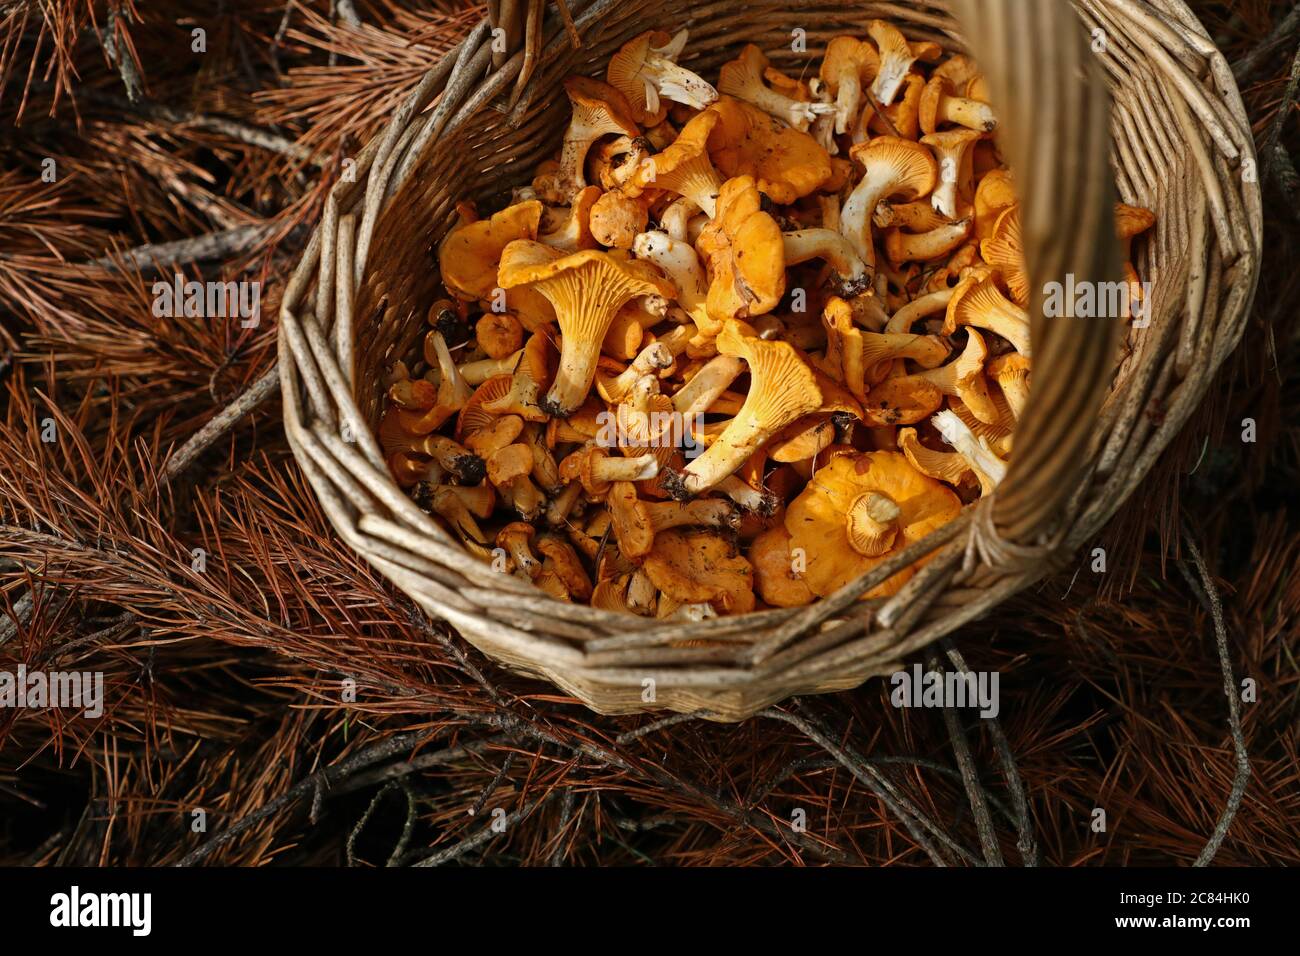 Mushroom picking is the perfect leisure in these corona times. In addition, many mushroom experts predict that it will be a good mushroom year this year. Here a filled mushroom basket with chanterelles (Cantharellus cibarius). Photo Jeppe Gustafsson Stock Photo